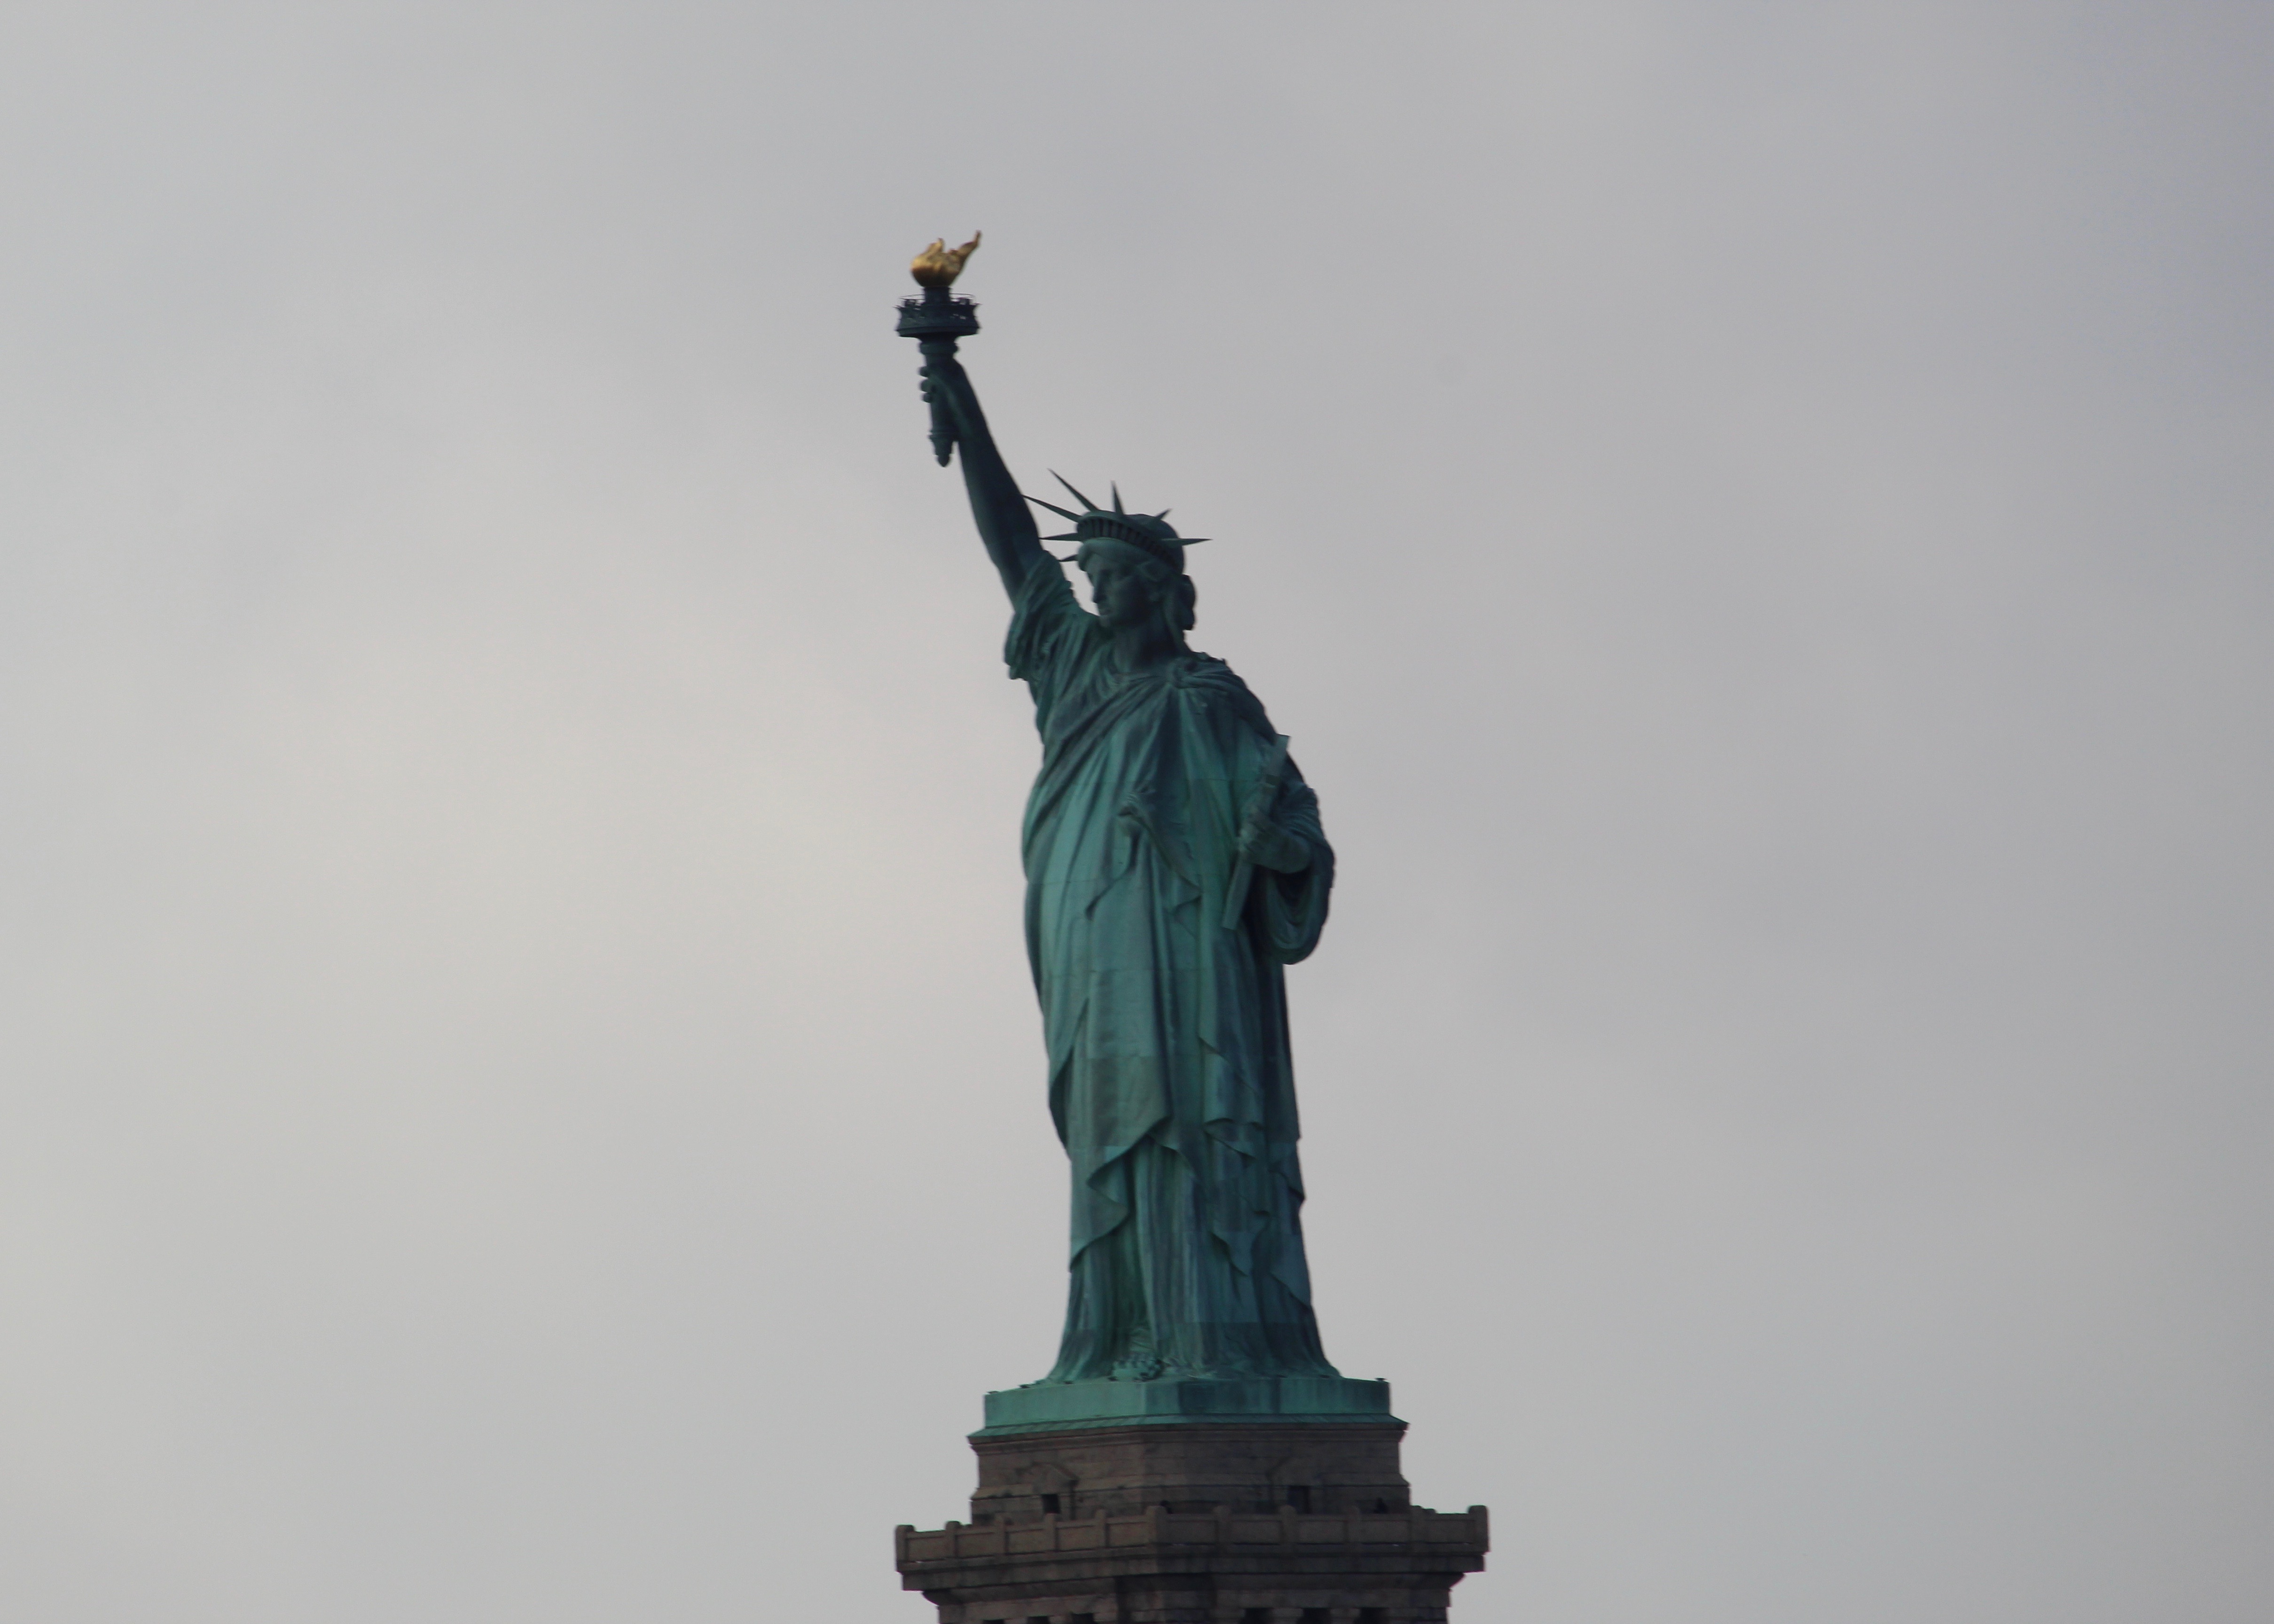 It’s time to live up to the Statue of Liberty’s promise